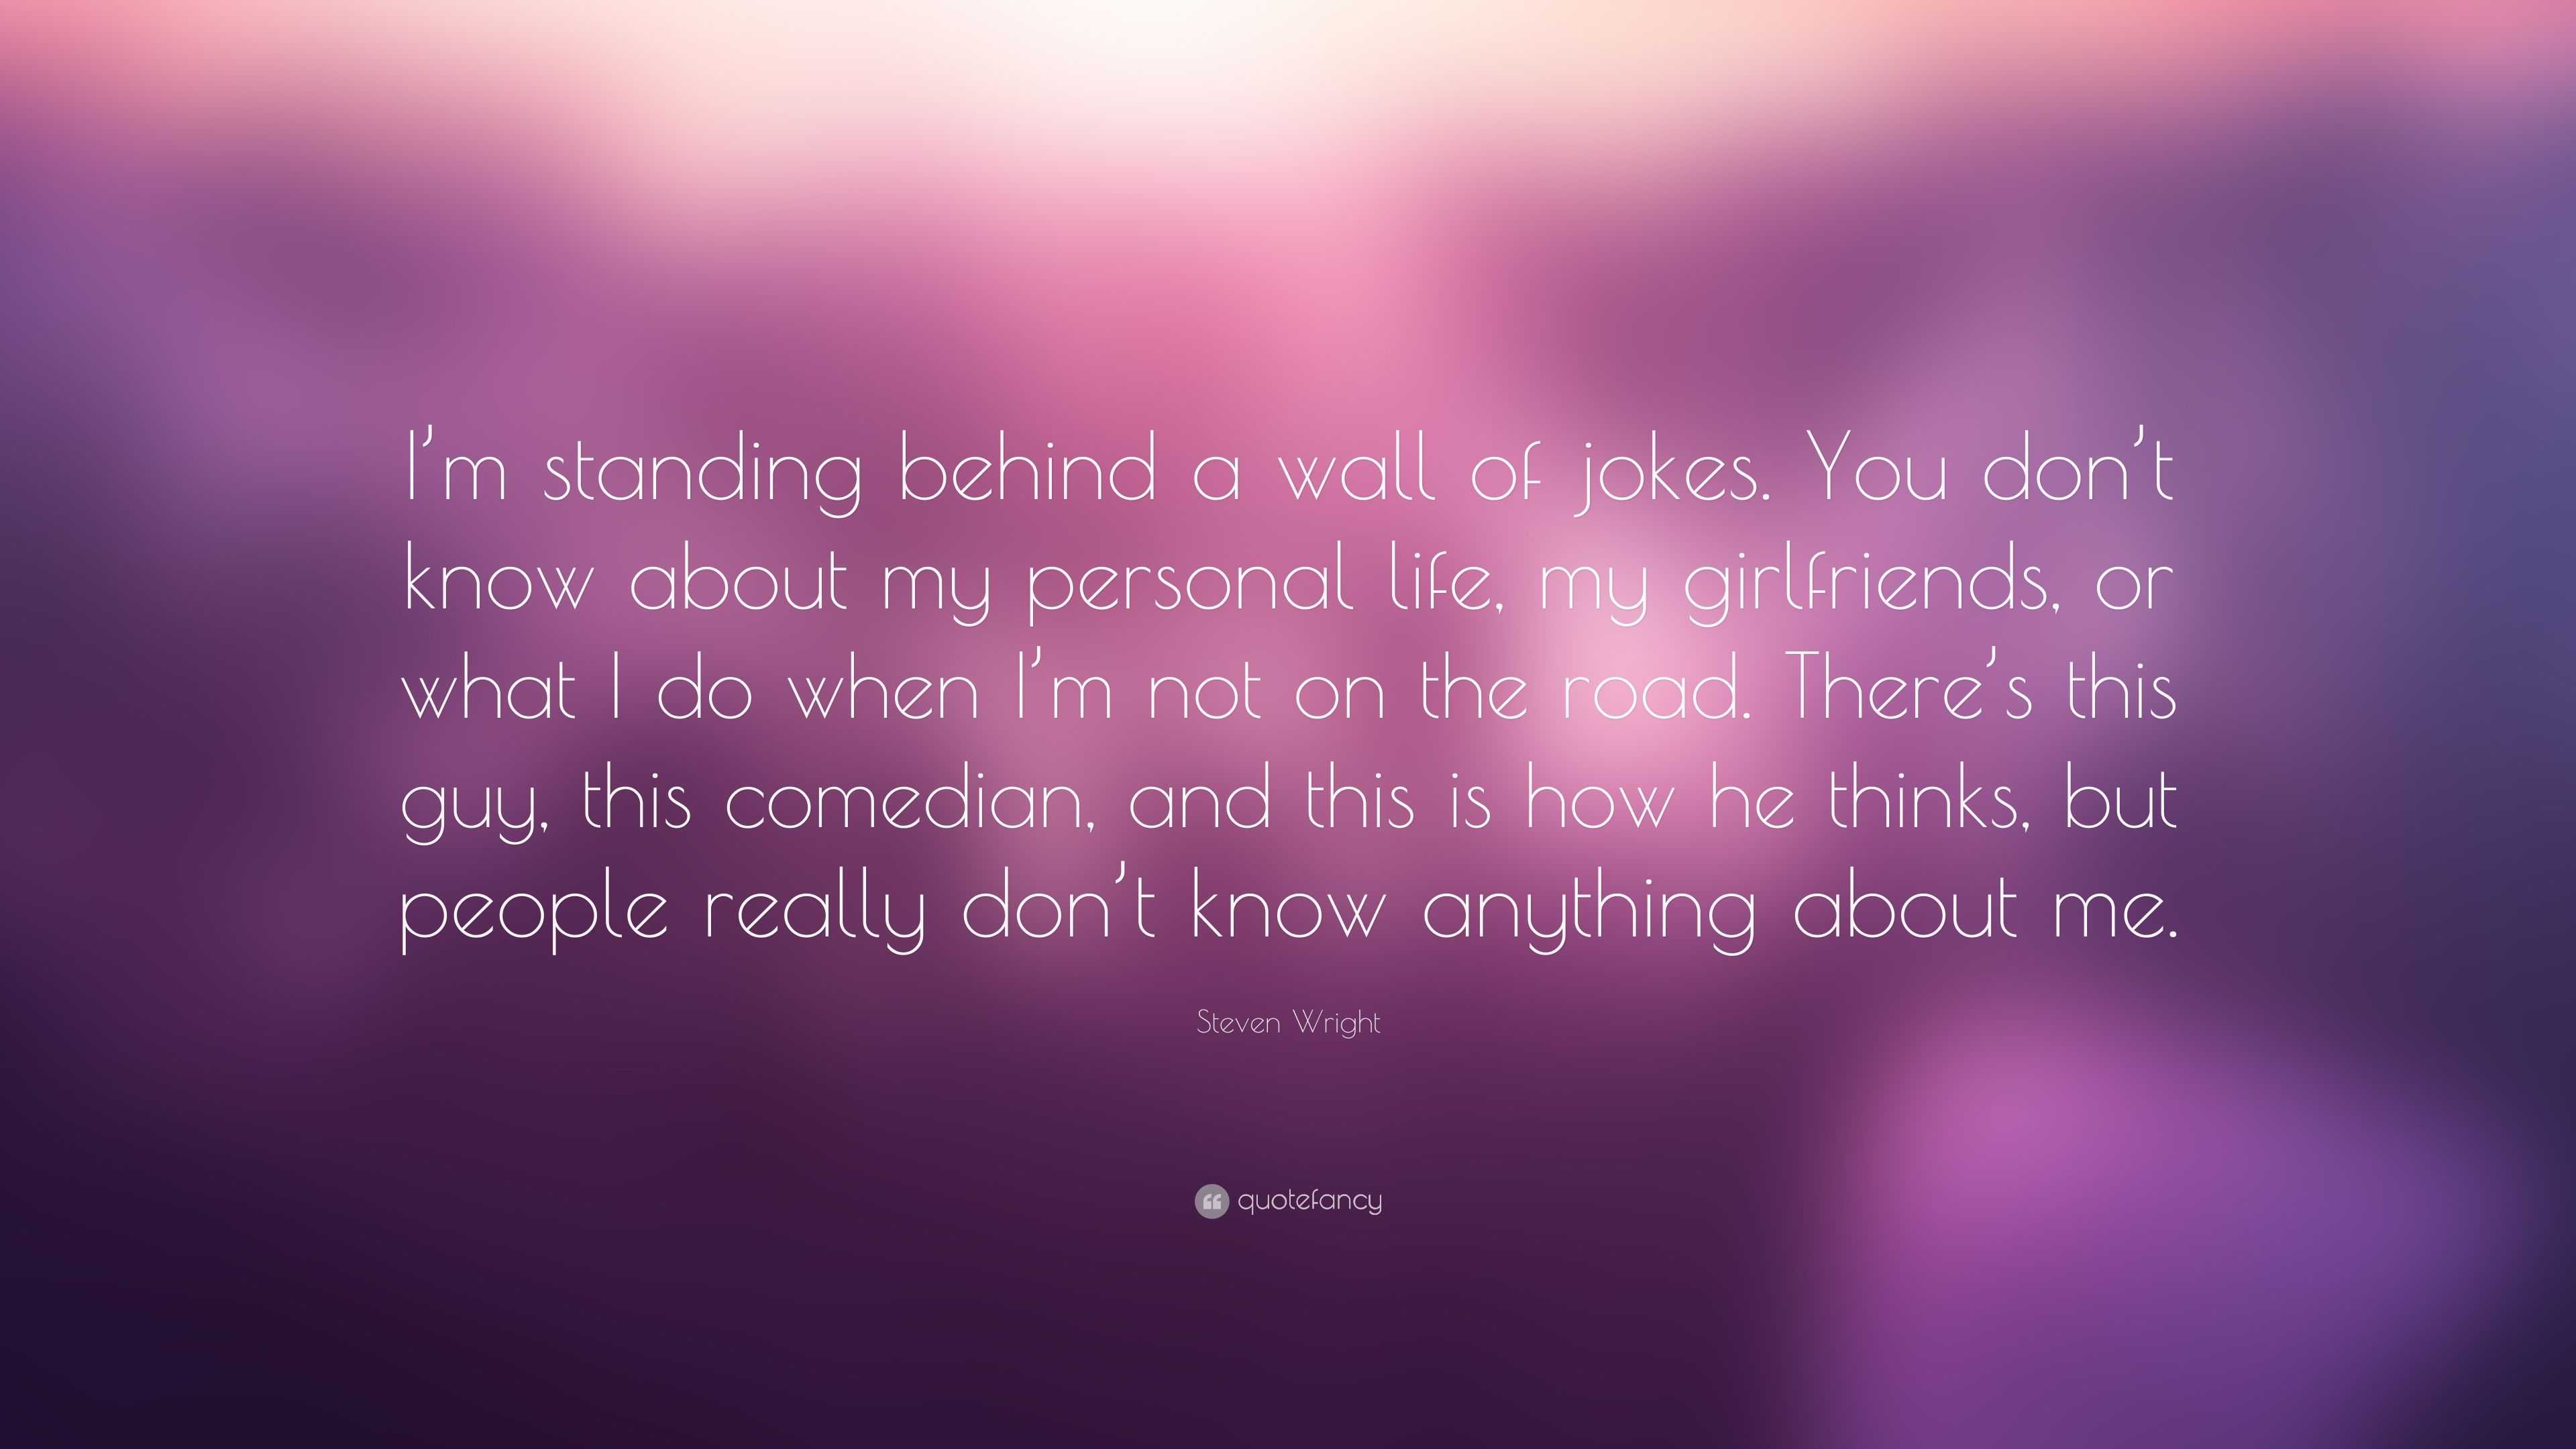 Steven Wright Quote: “I’m standing behind a wall of jokes. You don’t ...